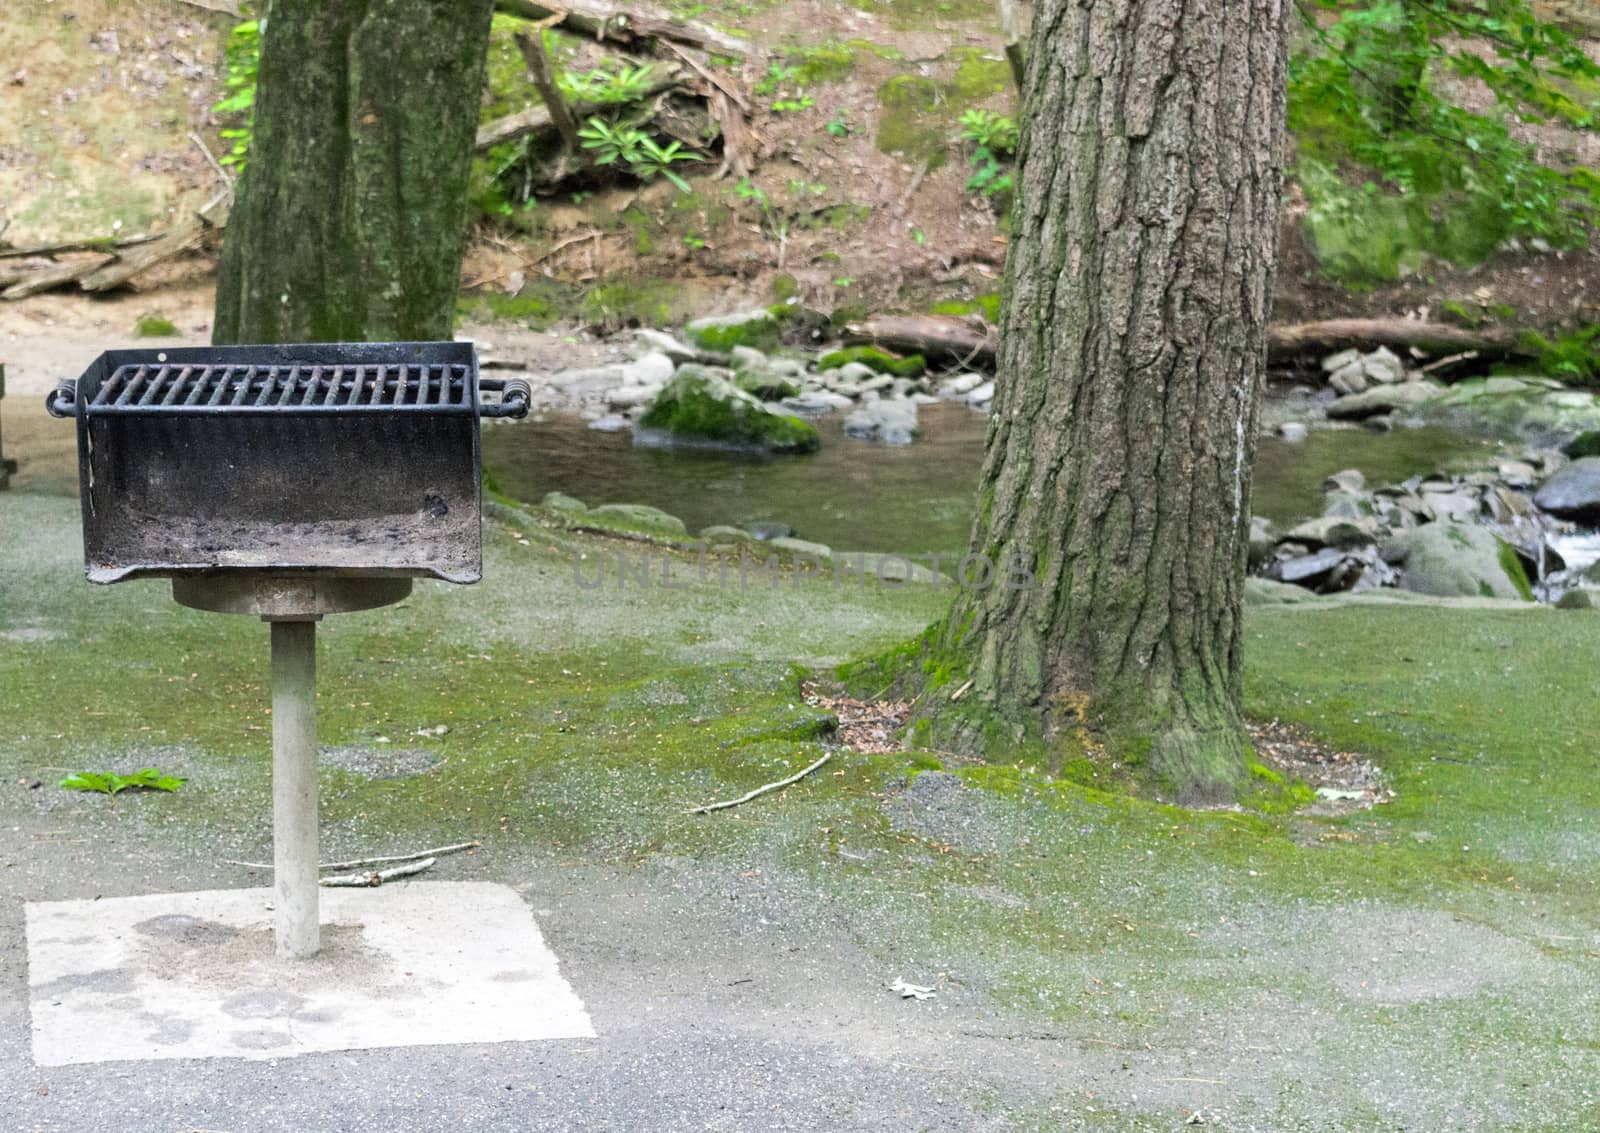 Horizontal shot of a heavily used barbecue grill at a picnic area with trees and a stream behind it.